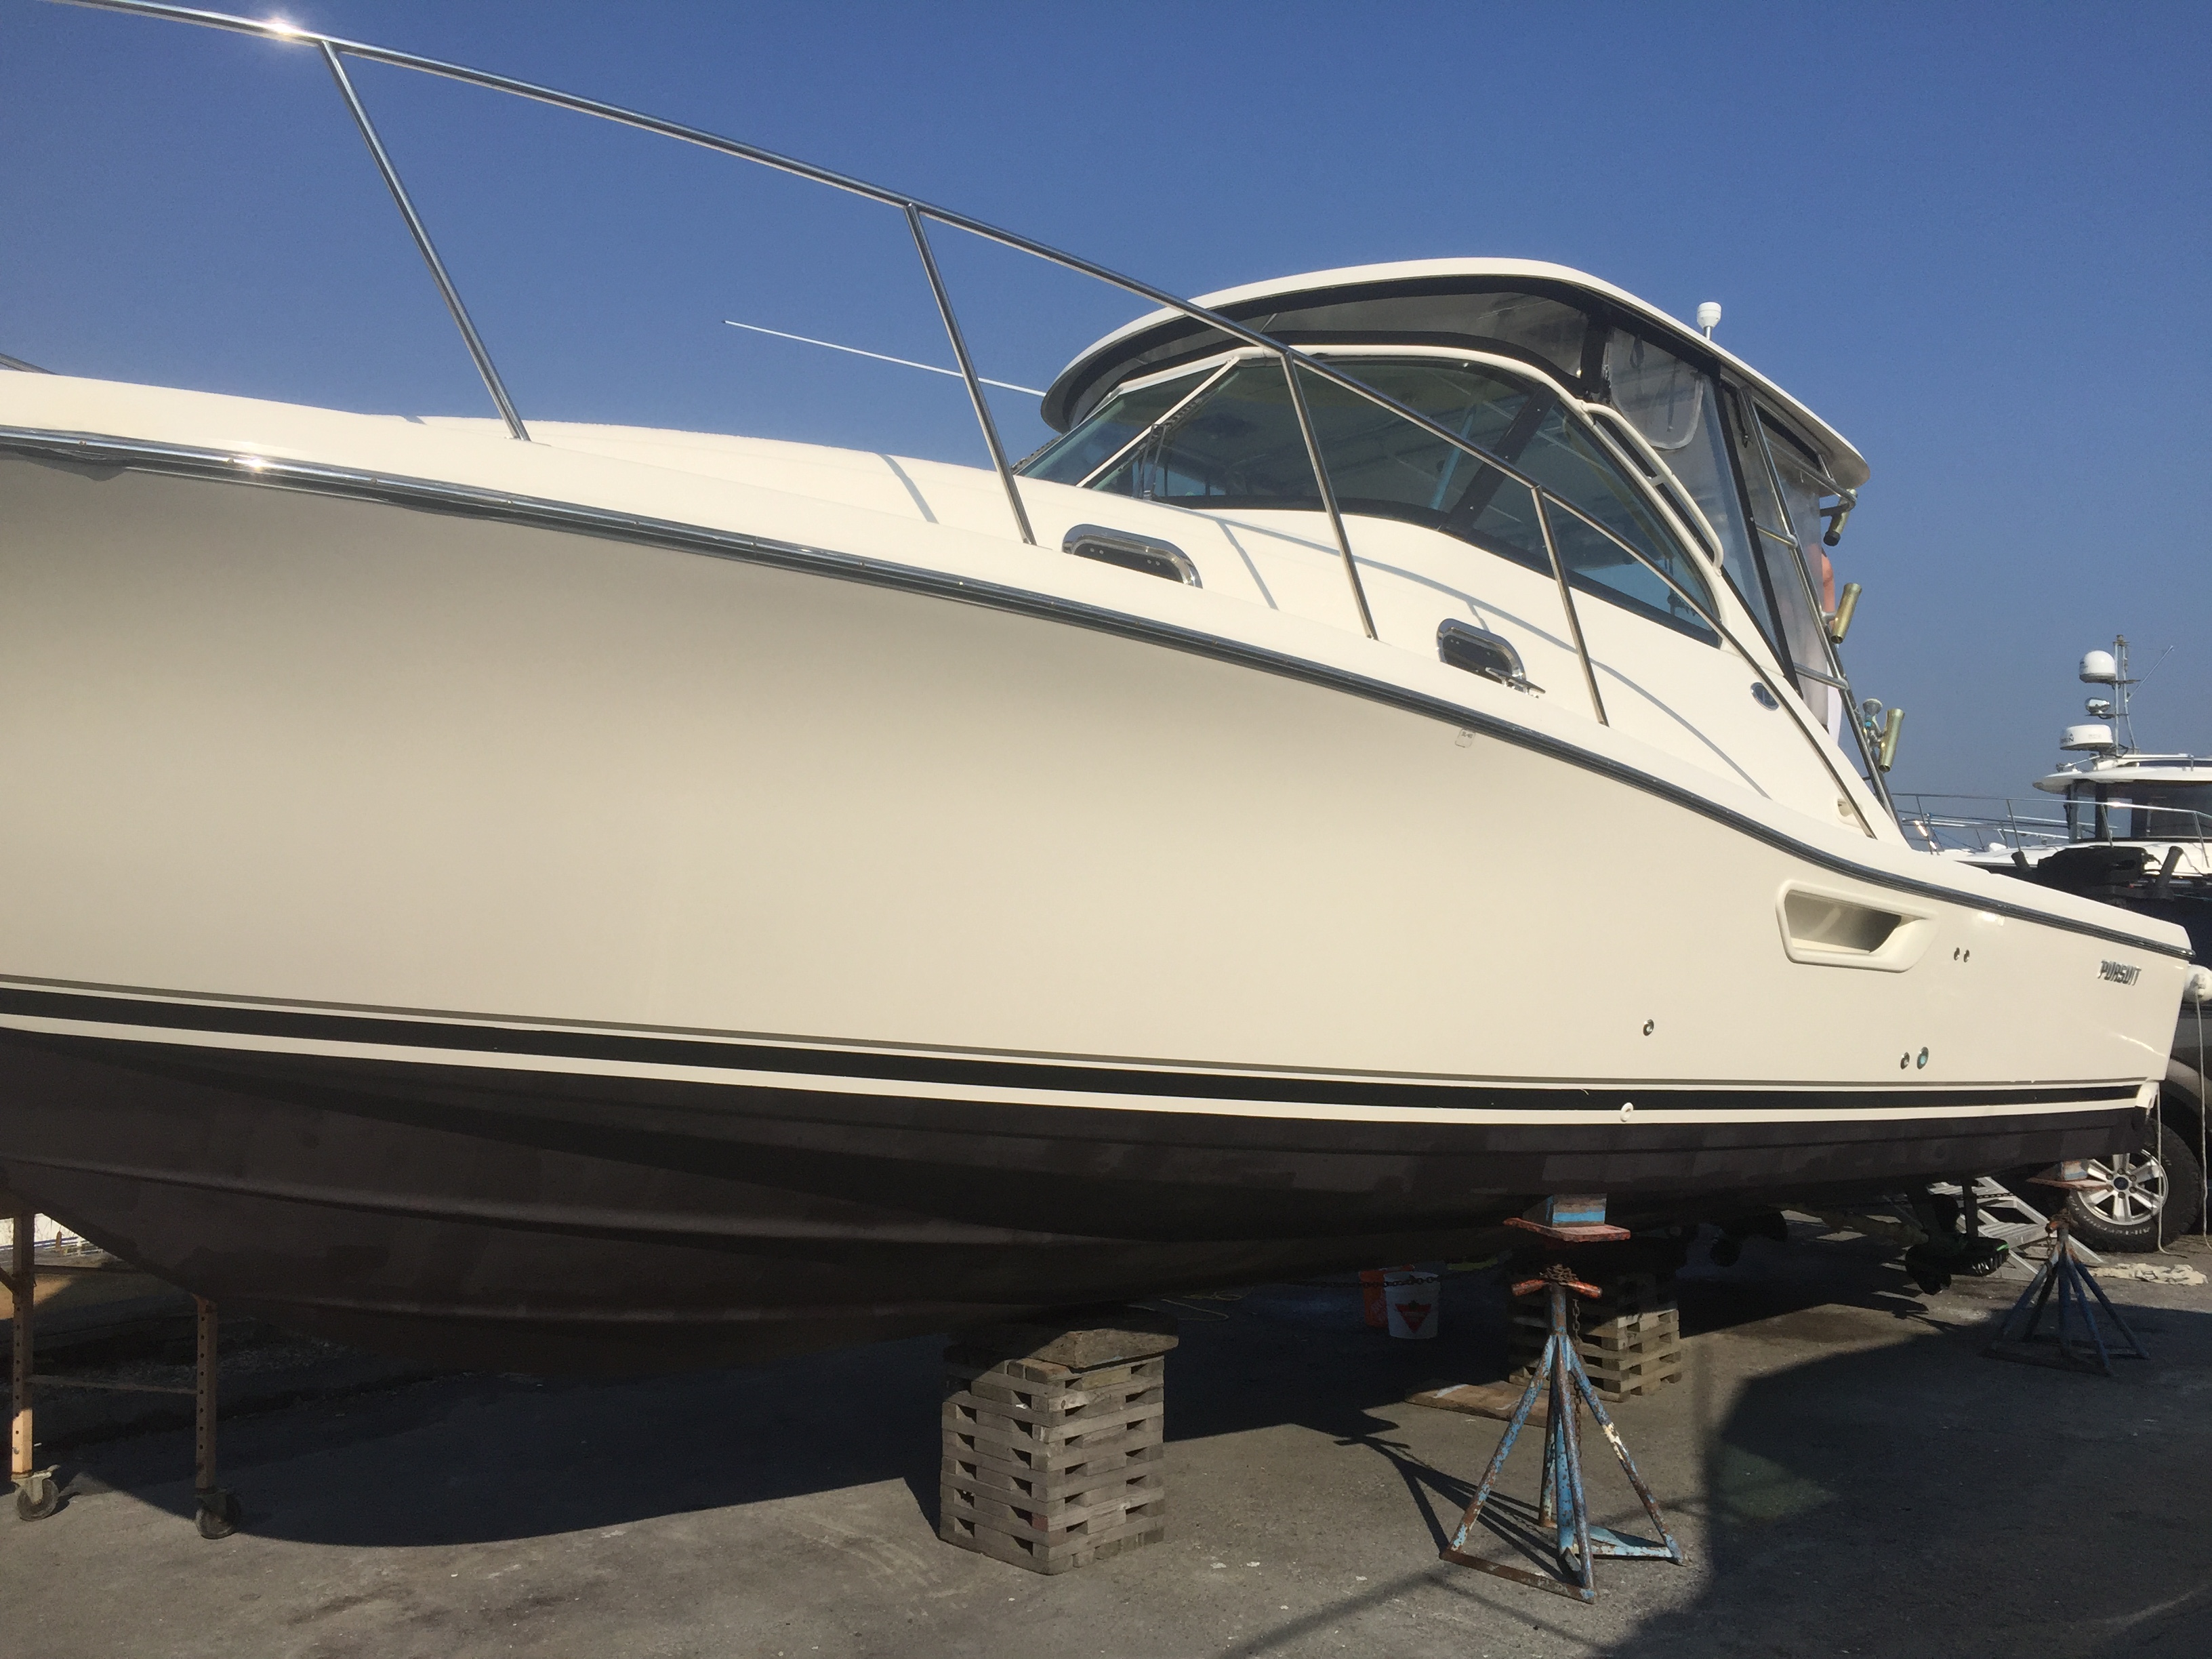 Onsite mobile boat repair service from MRV Marine Services at Skyline Marina in Richmond BC. Bottom painting, gel coat repairs and complete polishing and waxing maintenance service.